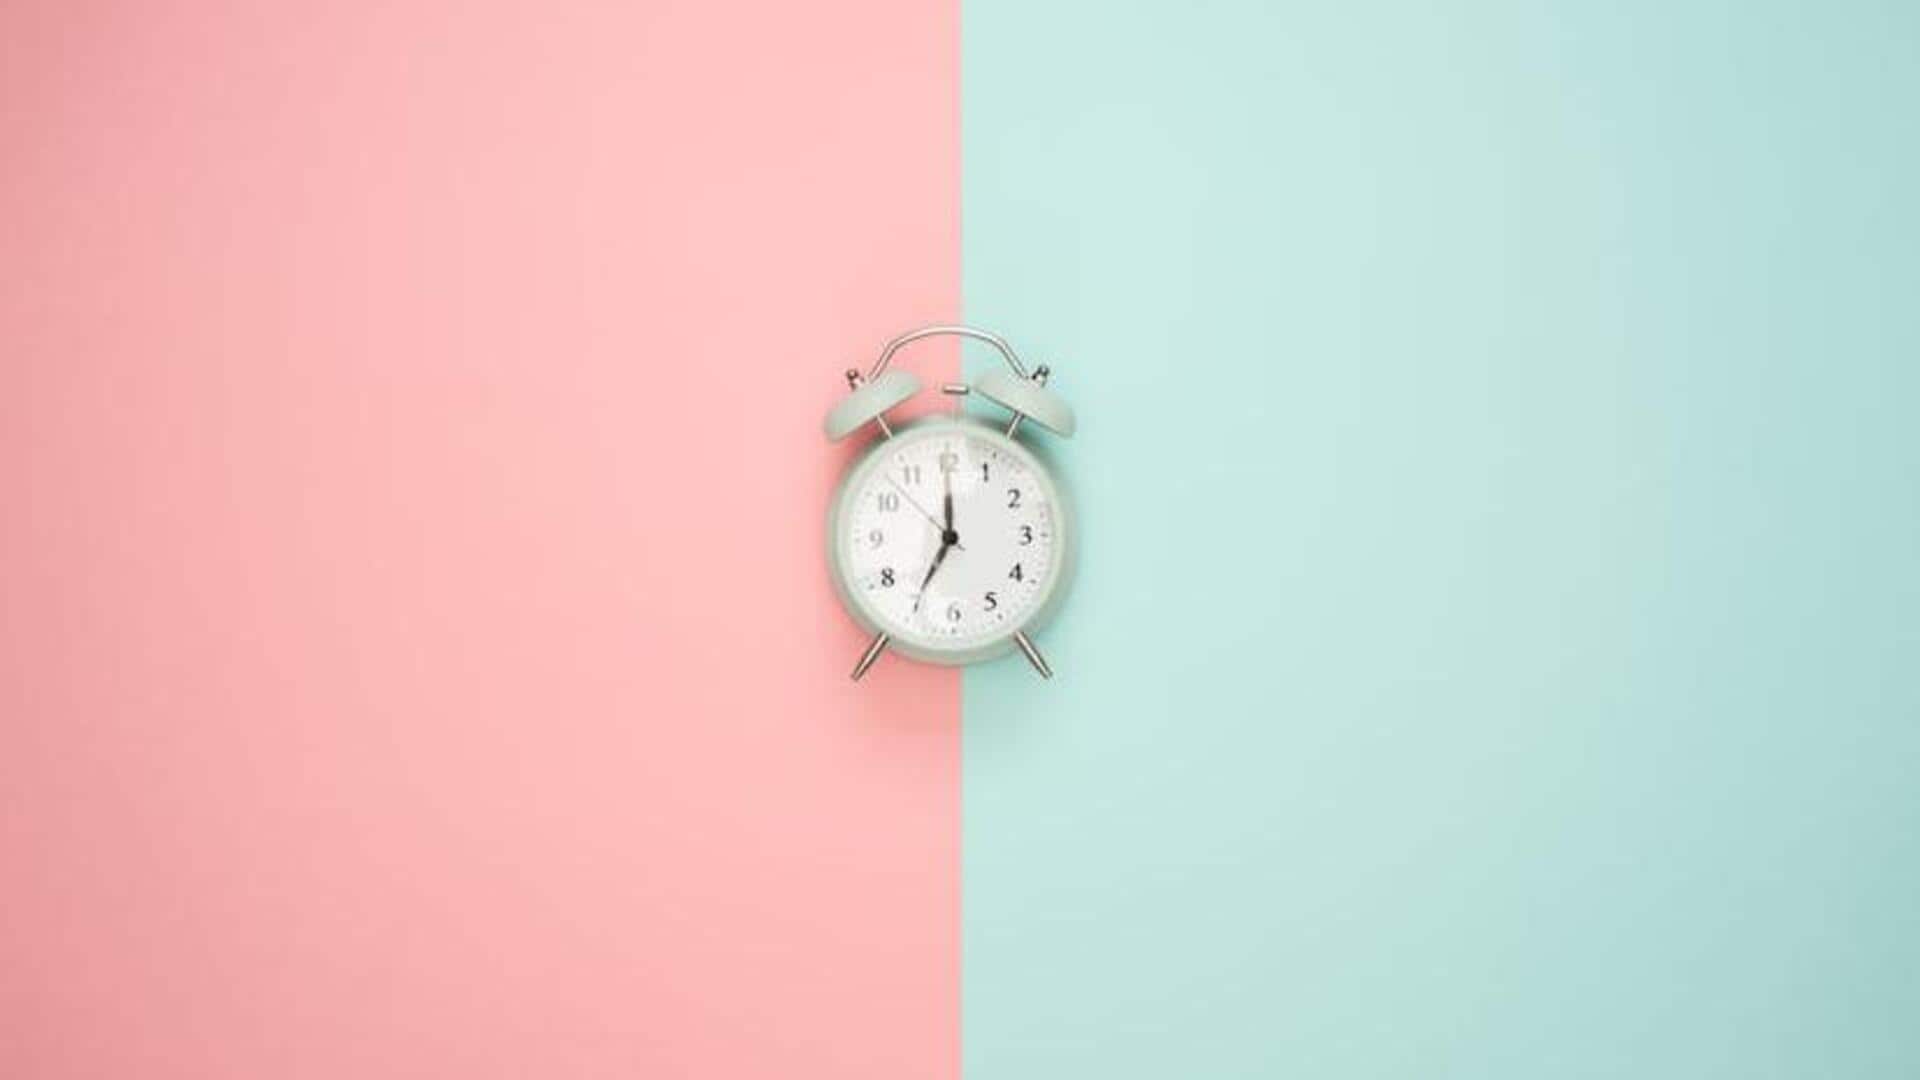 Quick tips on how to manage your time wisely